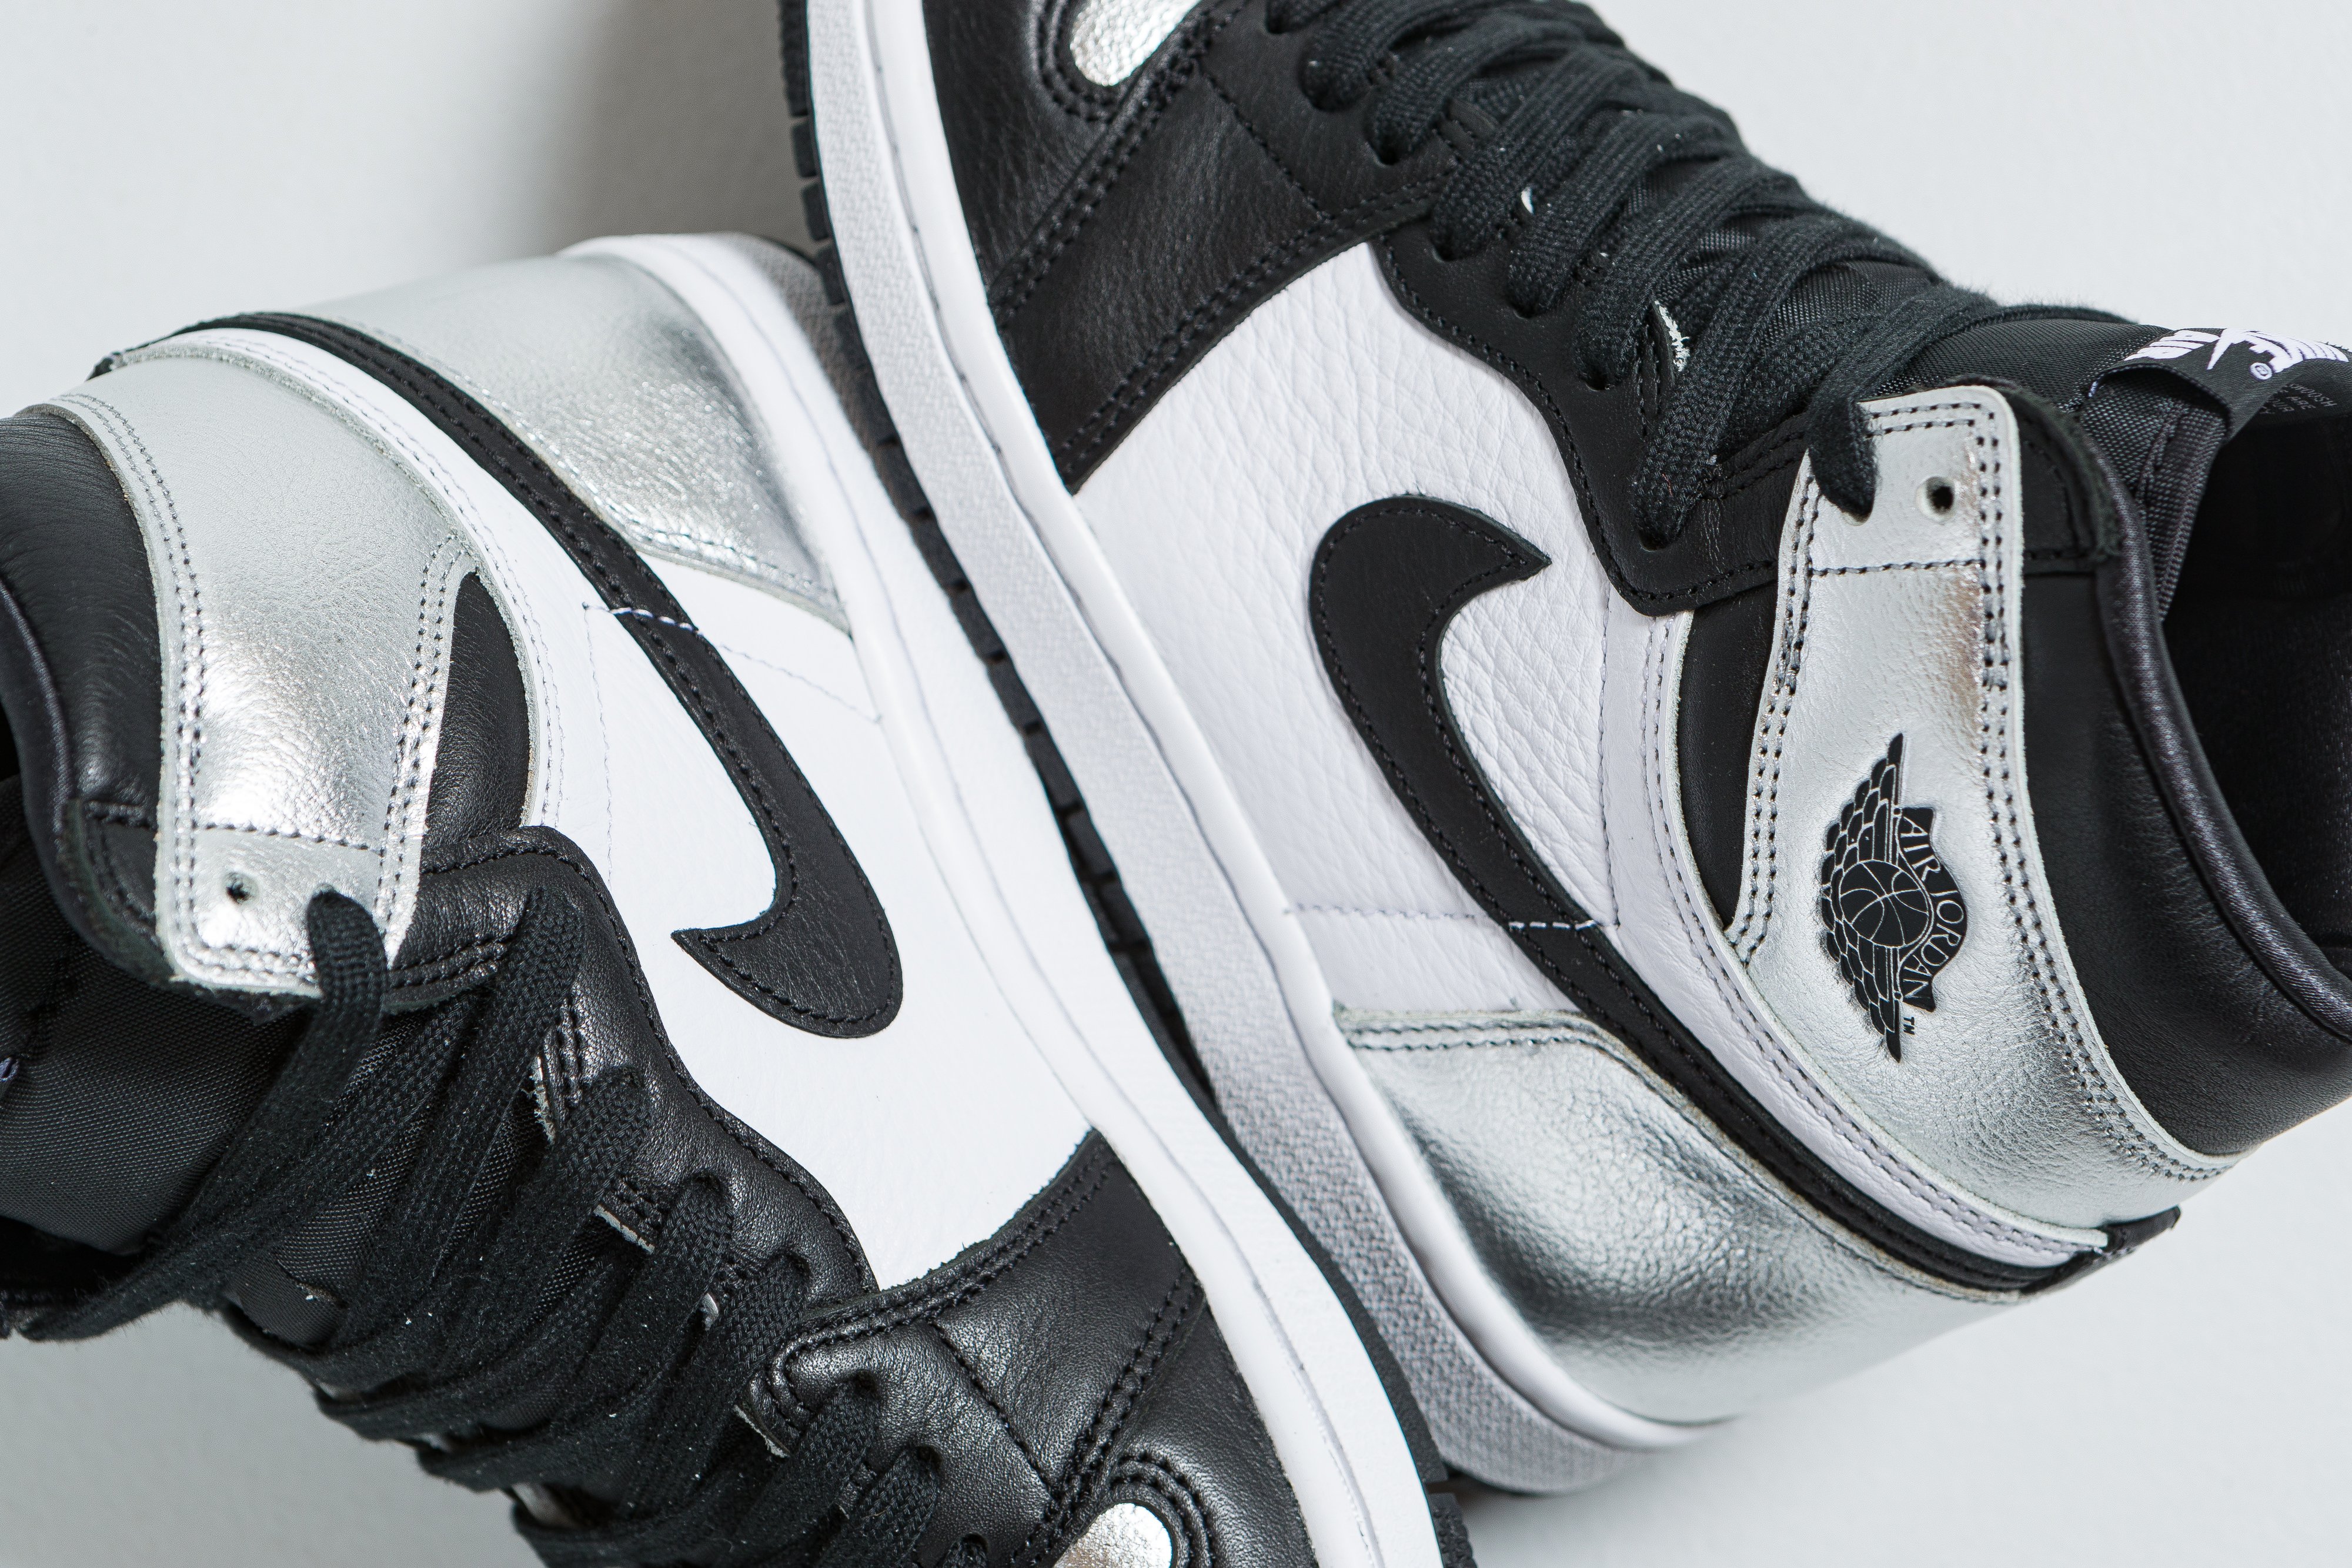 Up There Launches - Nike Air Jordan 1 Women's 'Silver Toe'